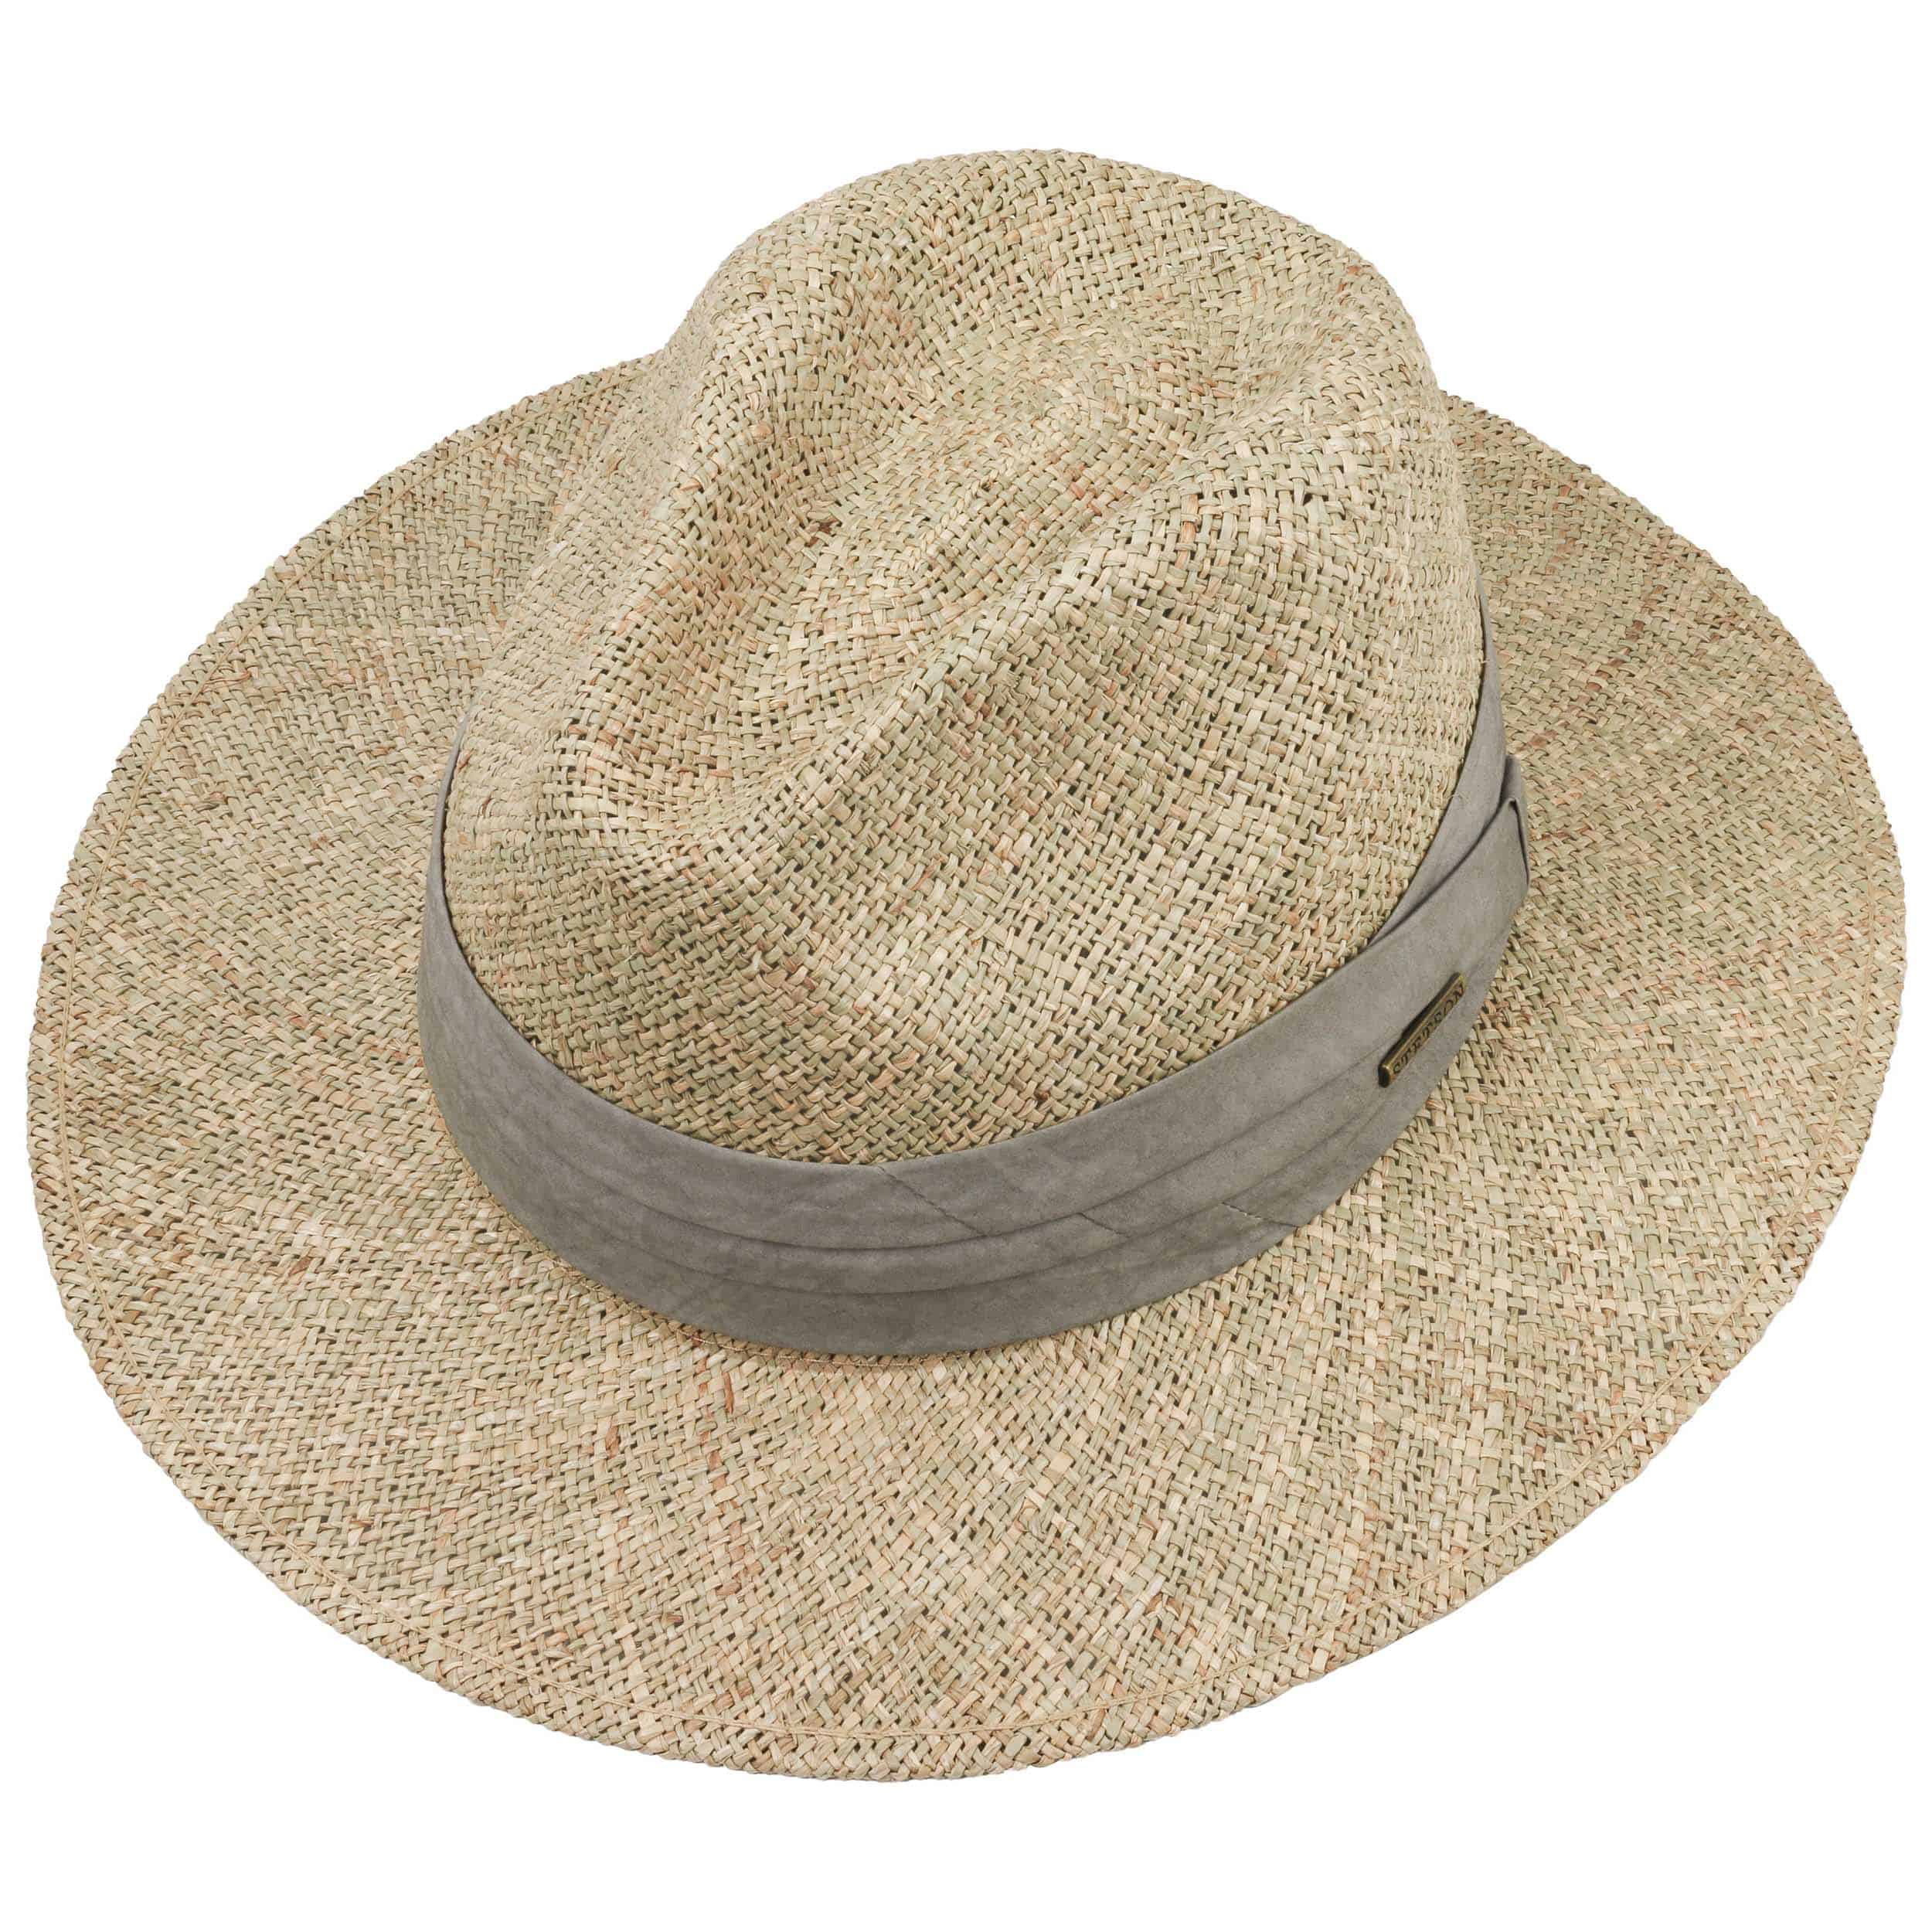 Caney Seagrass Traveller Straw Hat by Stetson - 99,00